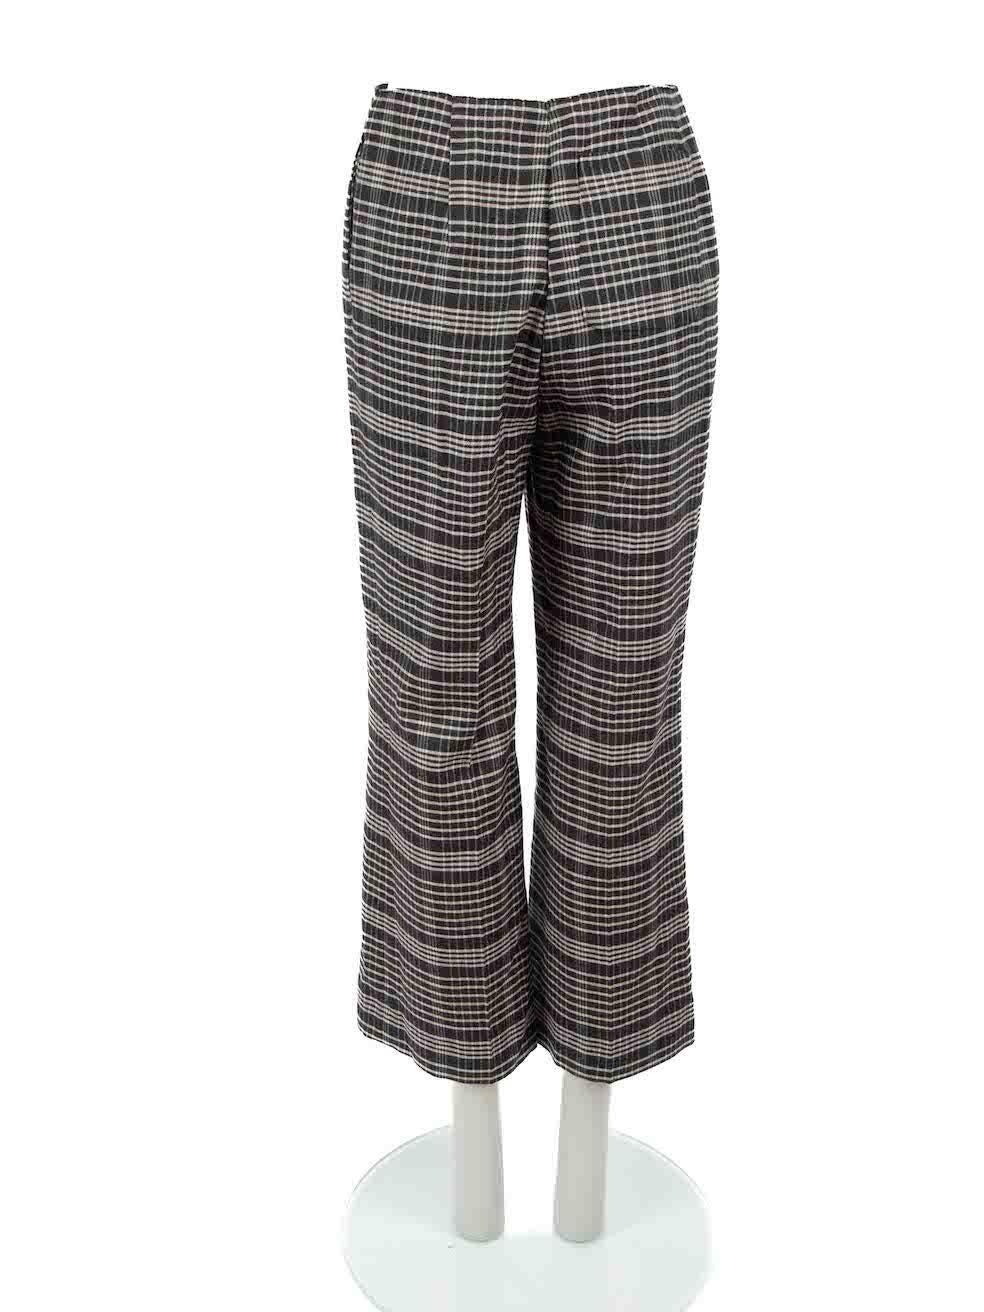 Acne Studios Grey Wool Checkered Trousers Size S In Excellent Condition For Sale In London, GB